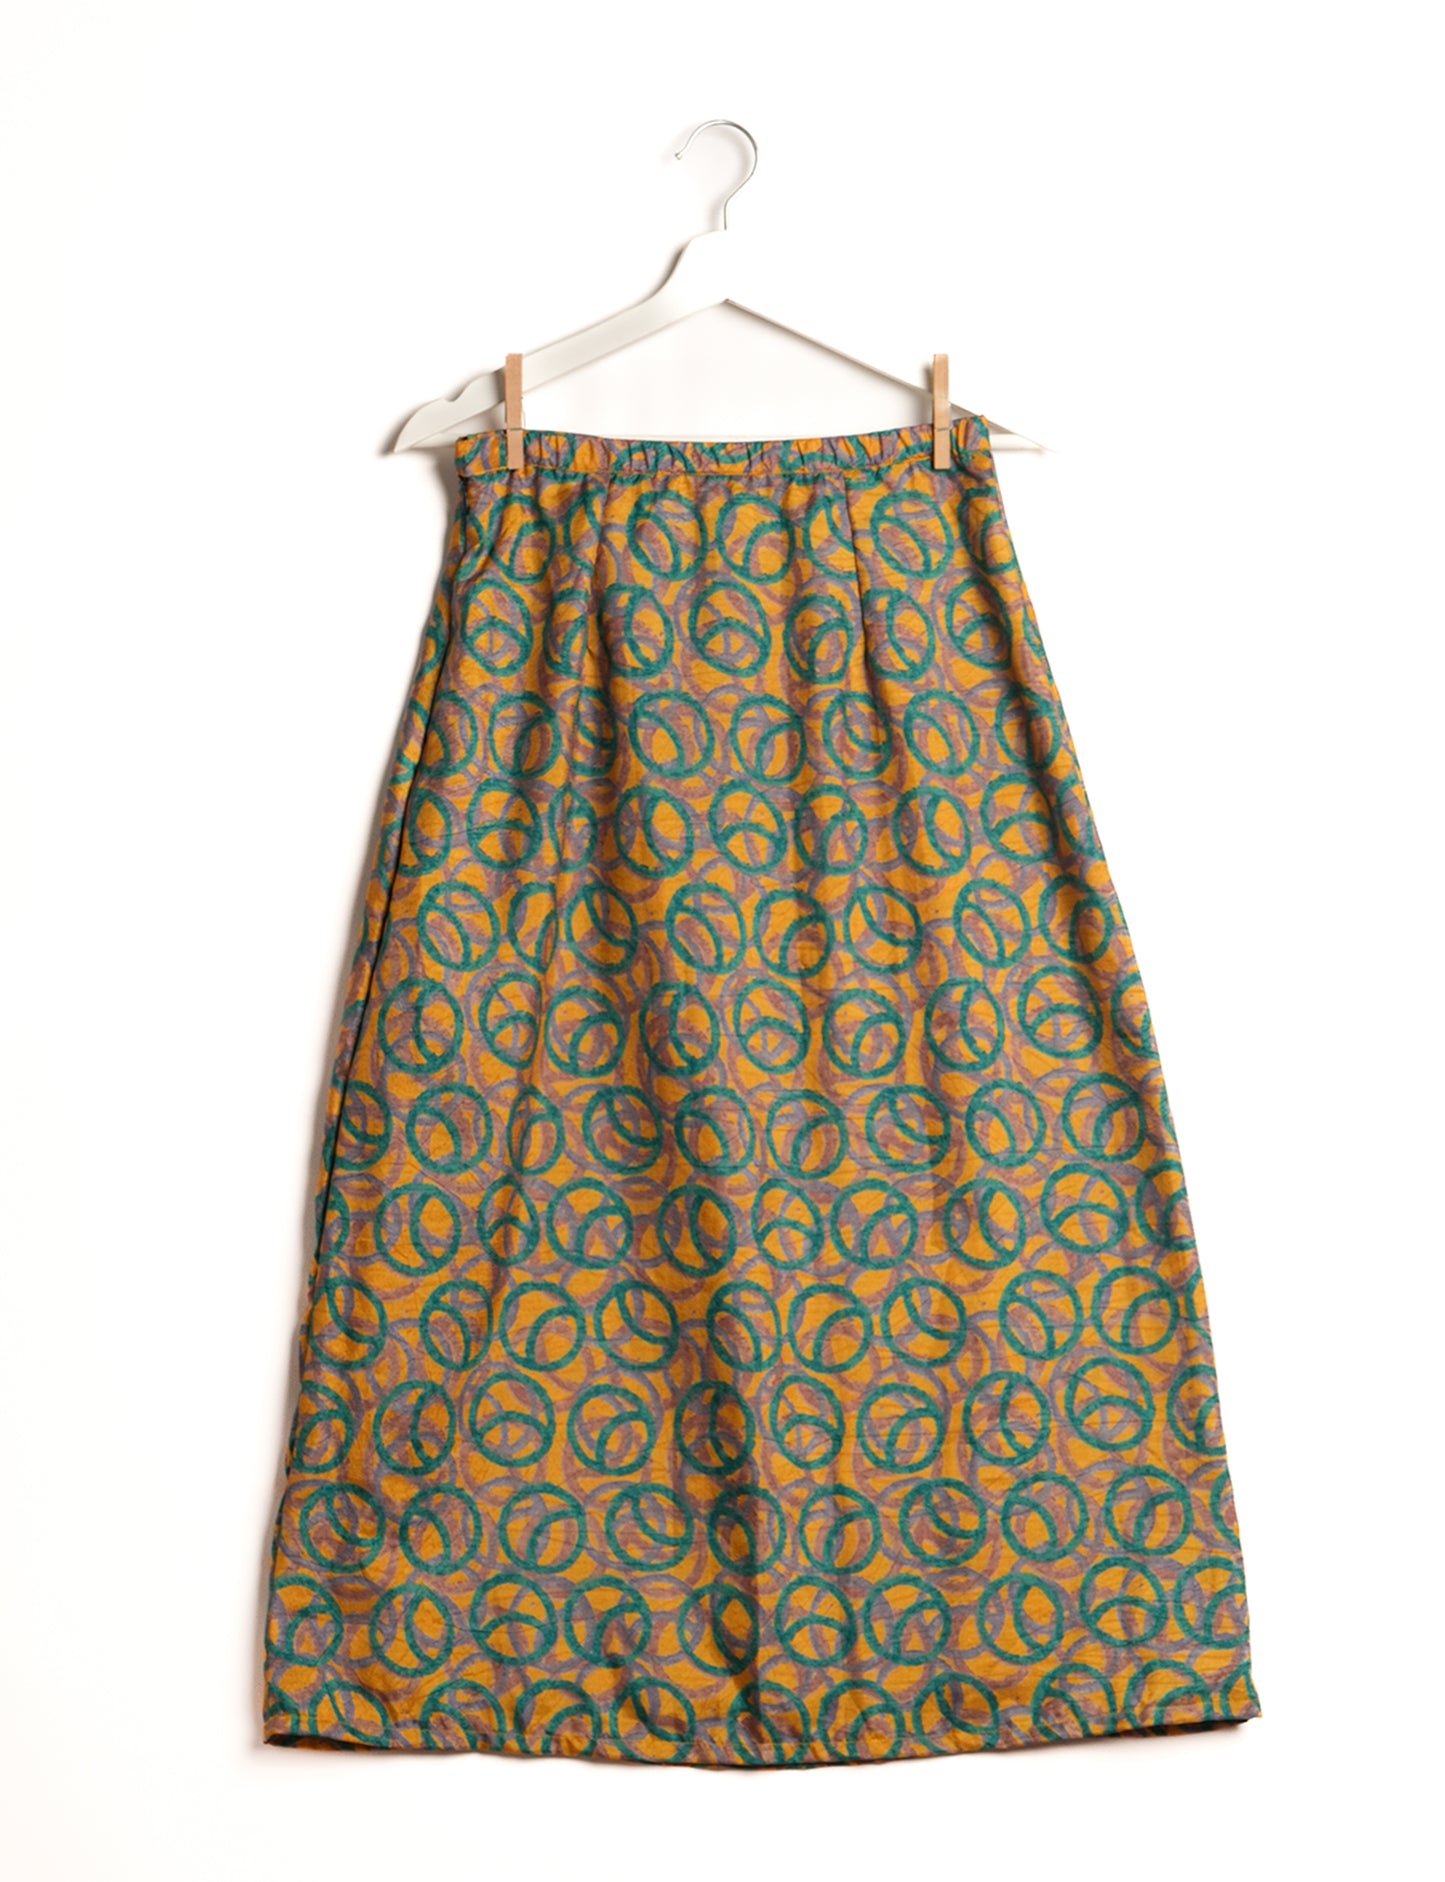 Sustainable A LINE SKIRT, a high-fashion choice for conscious individuals. Fitted at the waist, ankle-length, and ethically crafted for eco-friendly style.